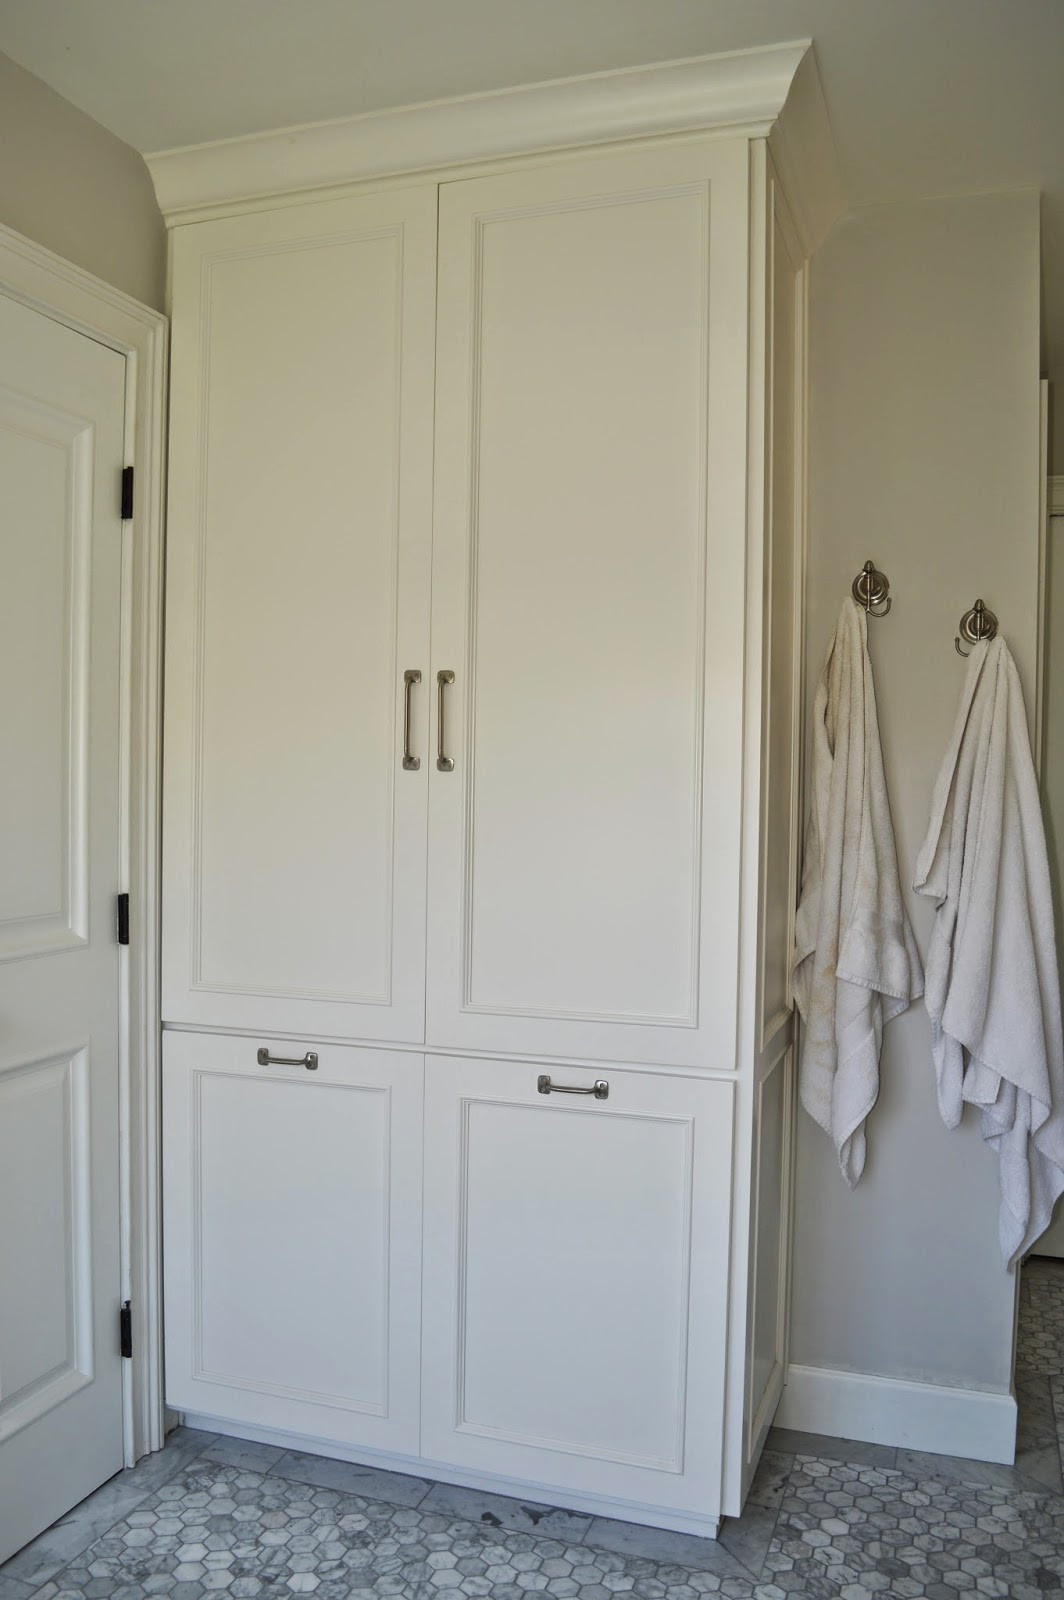 Tall Bathroom Cabinet With Doors
 The Cape Cod Ranch Renovation Master Bathroom